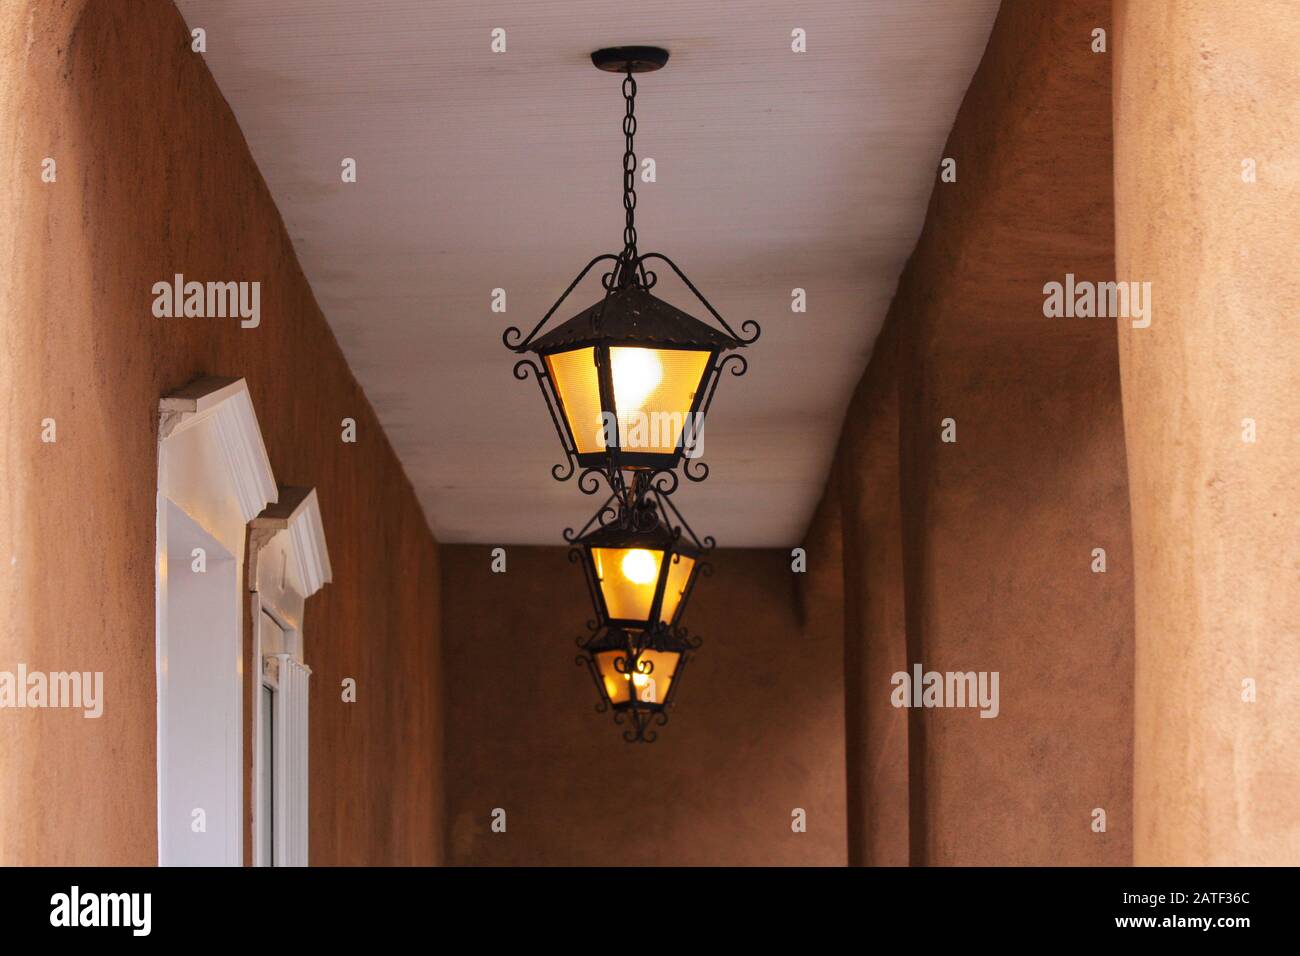 Three lantern lights in adobe building porch with plaster wall posts. Ornate iron lights white ceiling Stock Photo